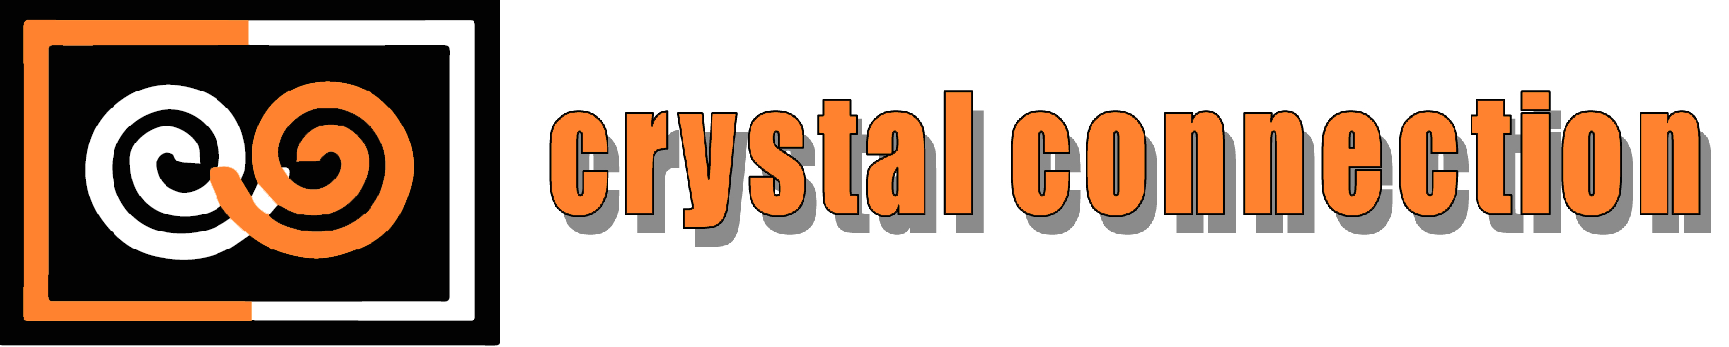 Crystal Connection